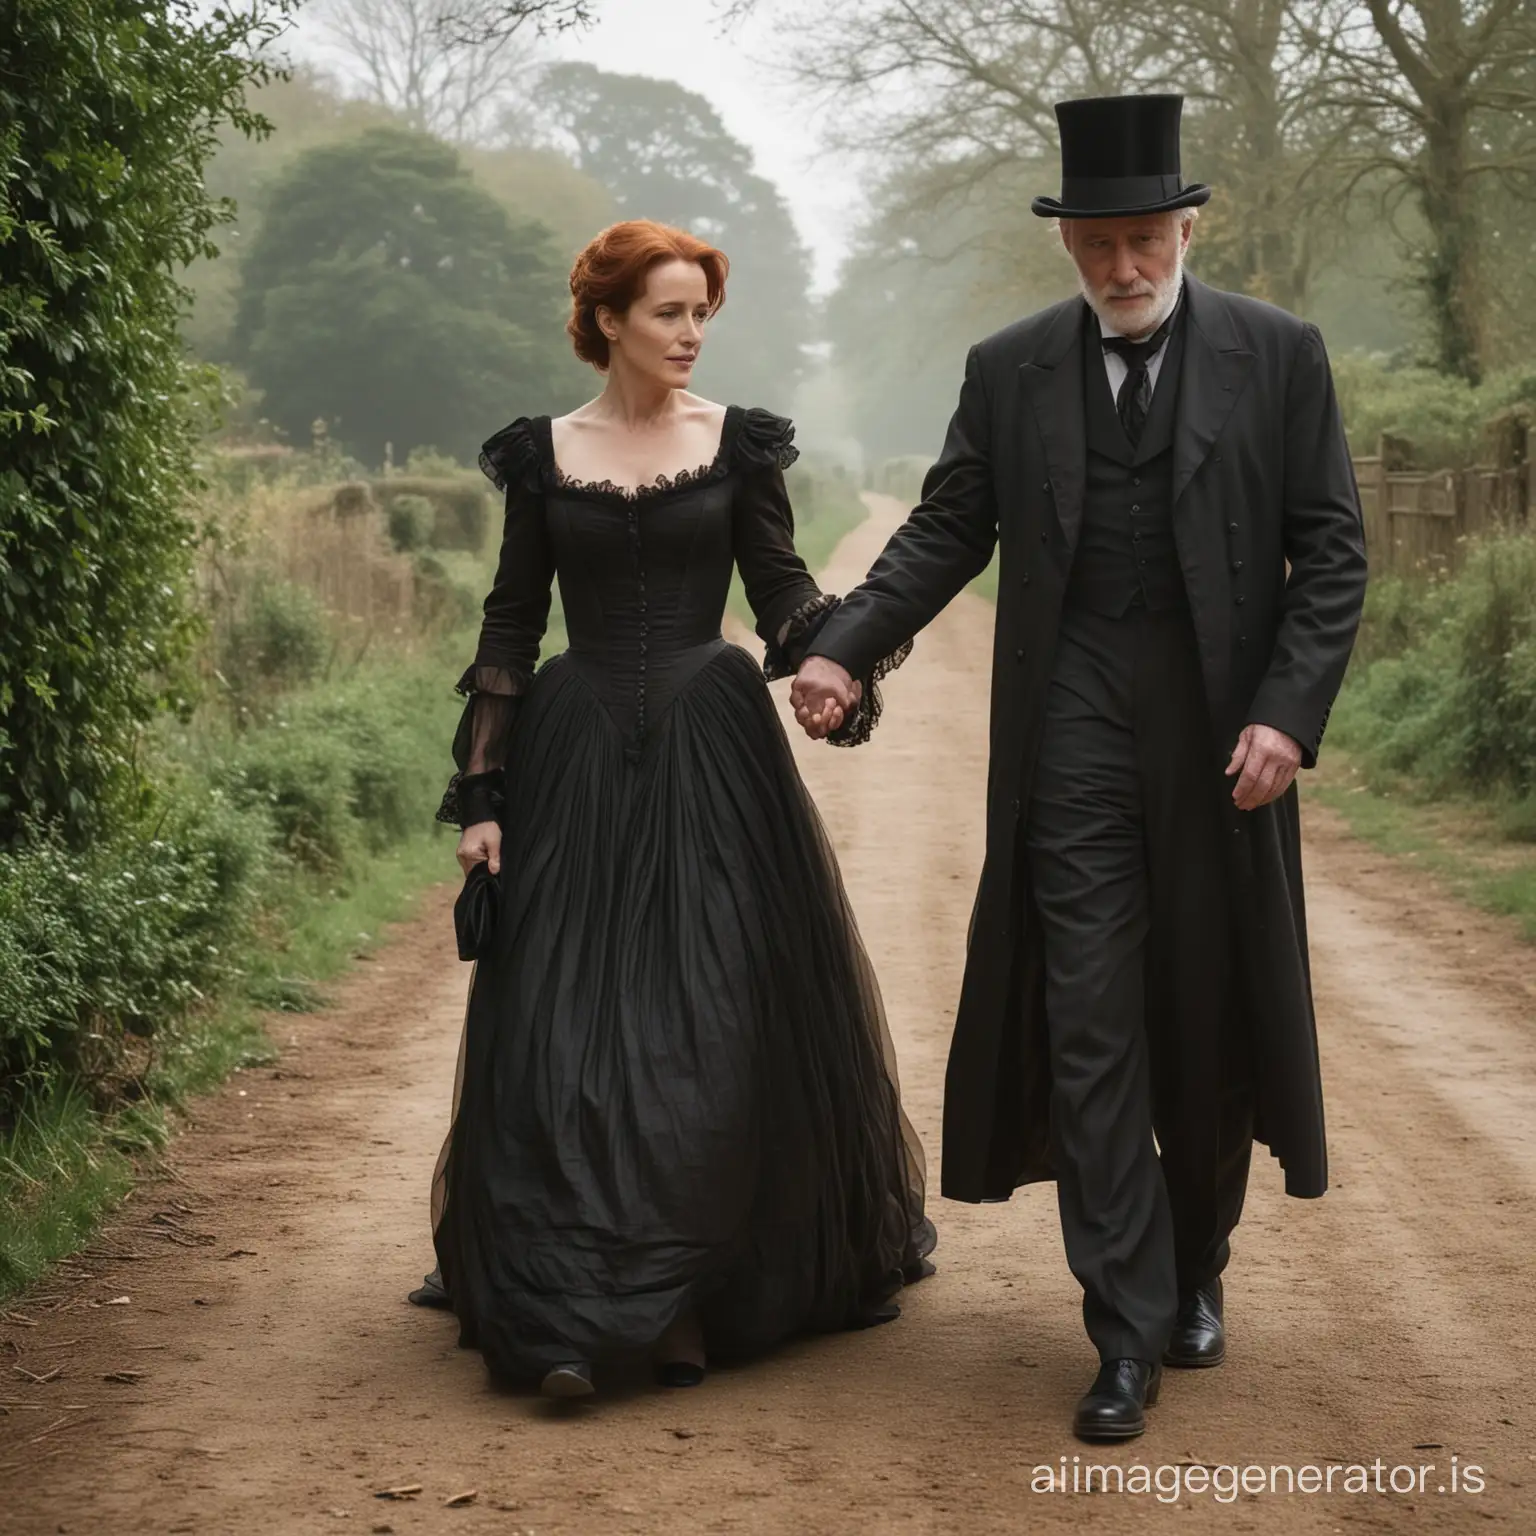 red hair Gillian Anderson wearing a dark brown floor-length loose billowing 1860 Victorian crinoline dress with a frilly bonnet and a floor-length velvet cloak around her shoulders walking hand in hand with an old man dressed into a black Victorian suit who seems to be her newlywed husband